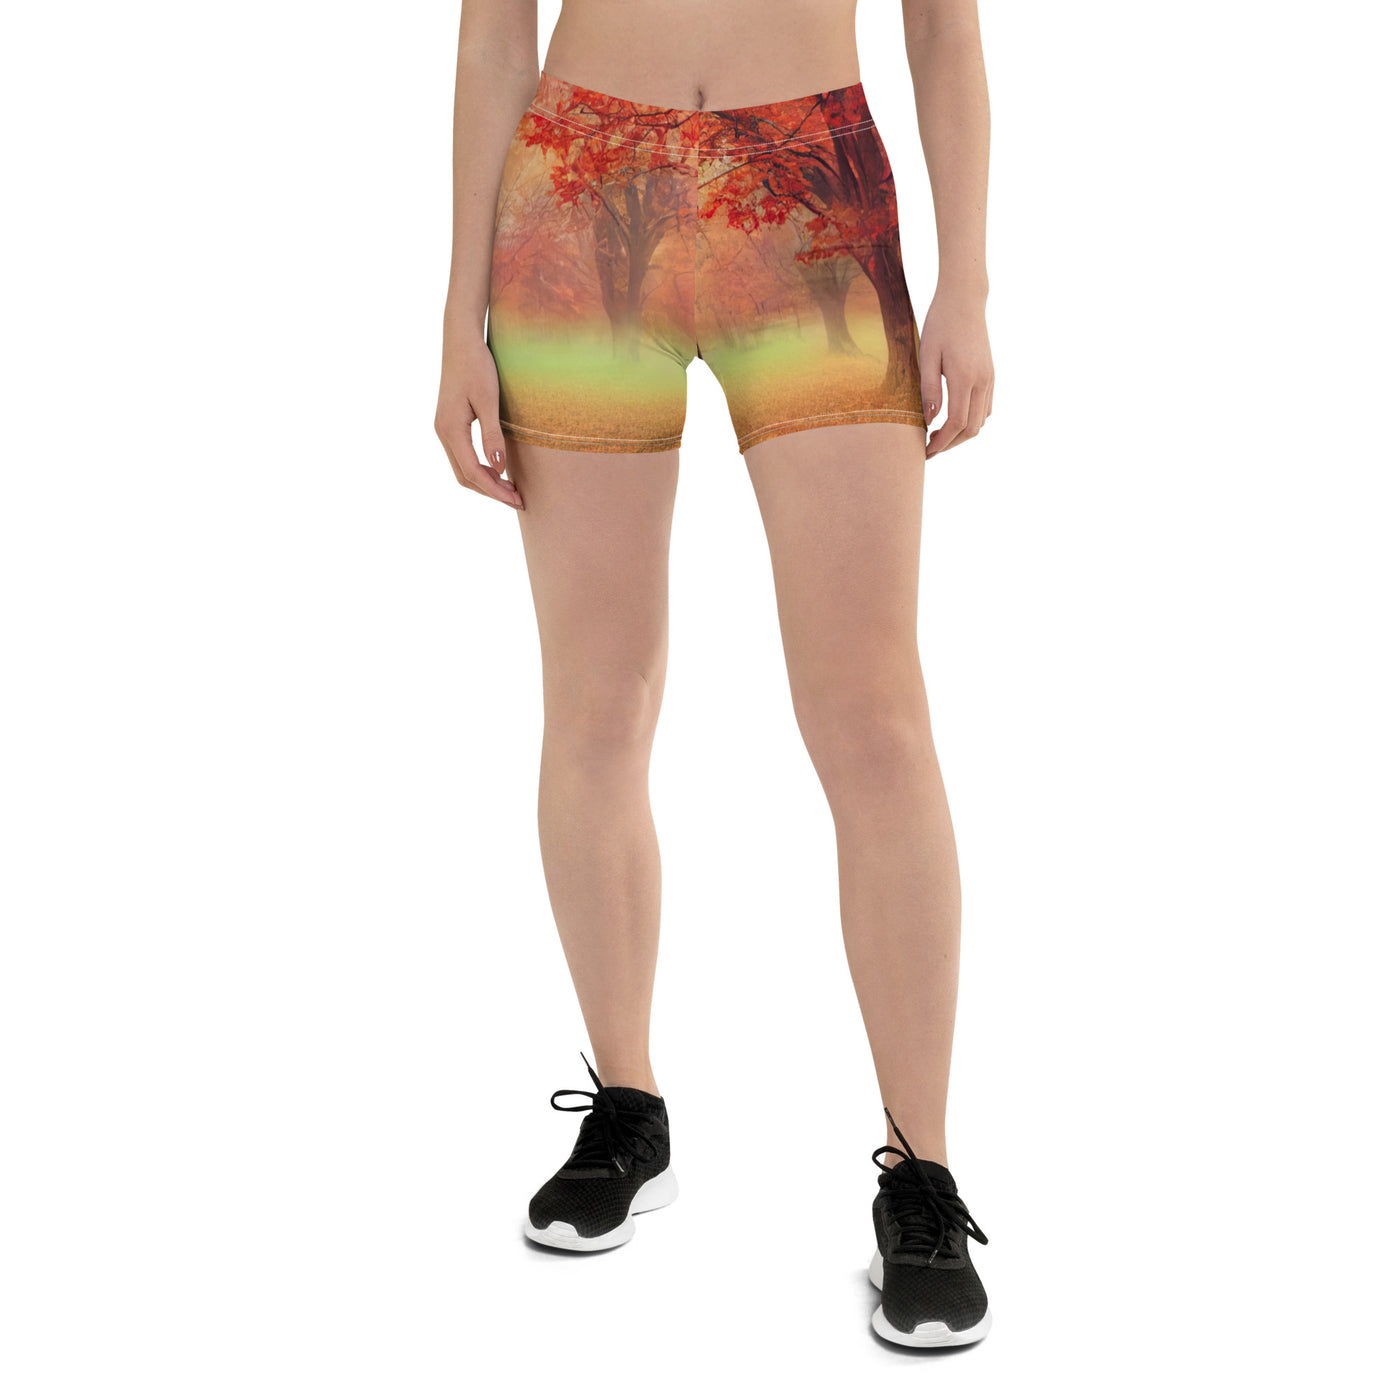 Wald im Herbst - Rote Herbstblätter - Shorts (All-Over Print) camping xxx 3XL